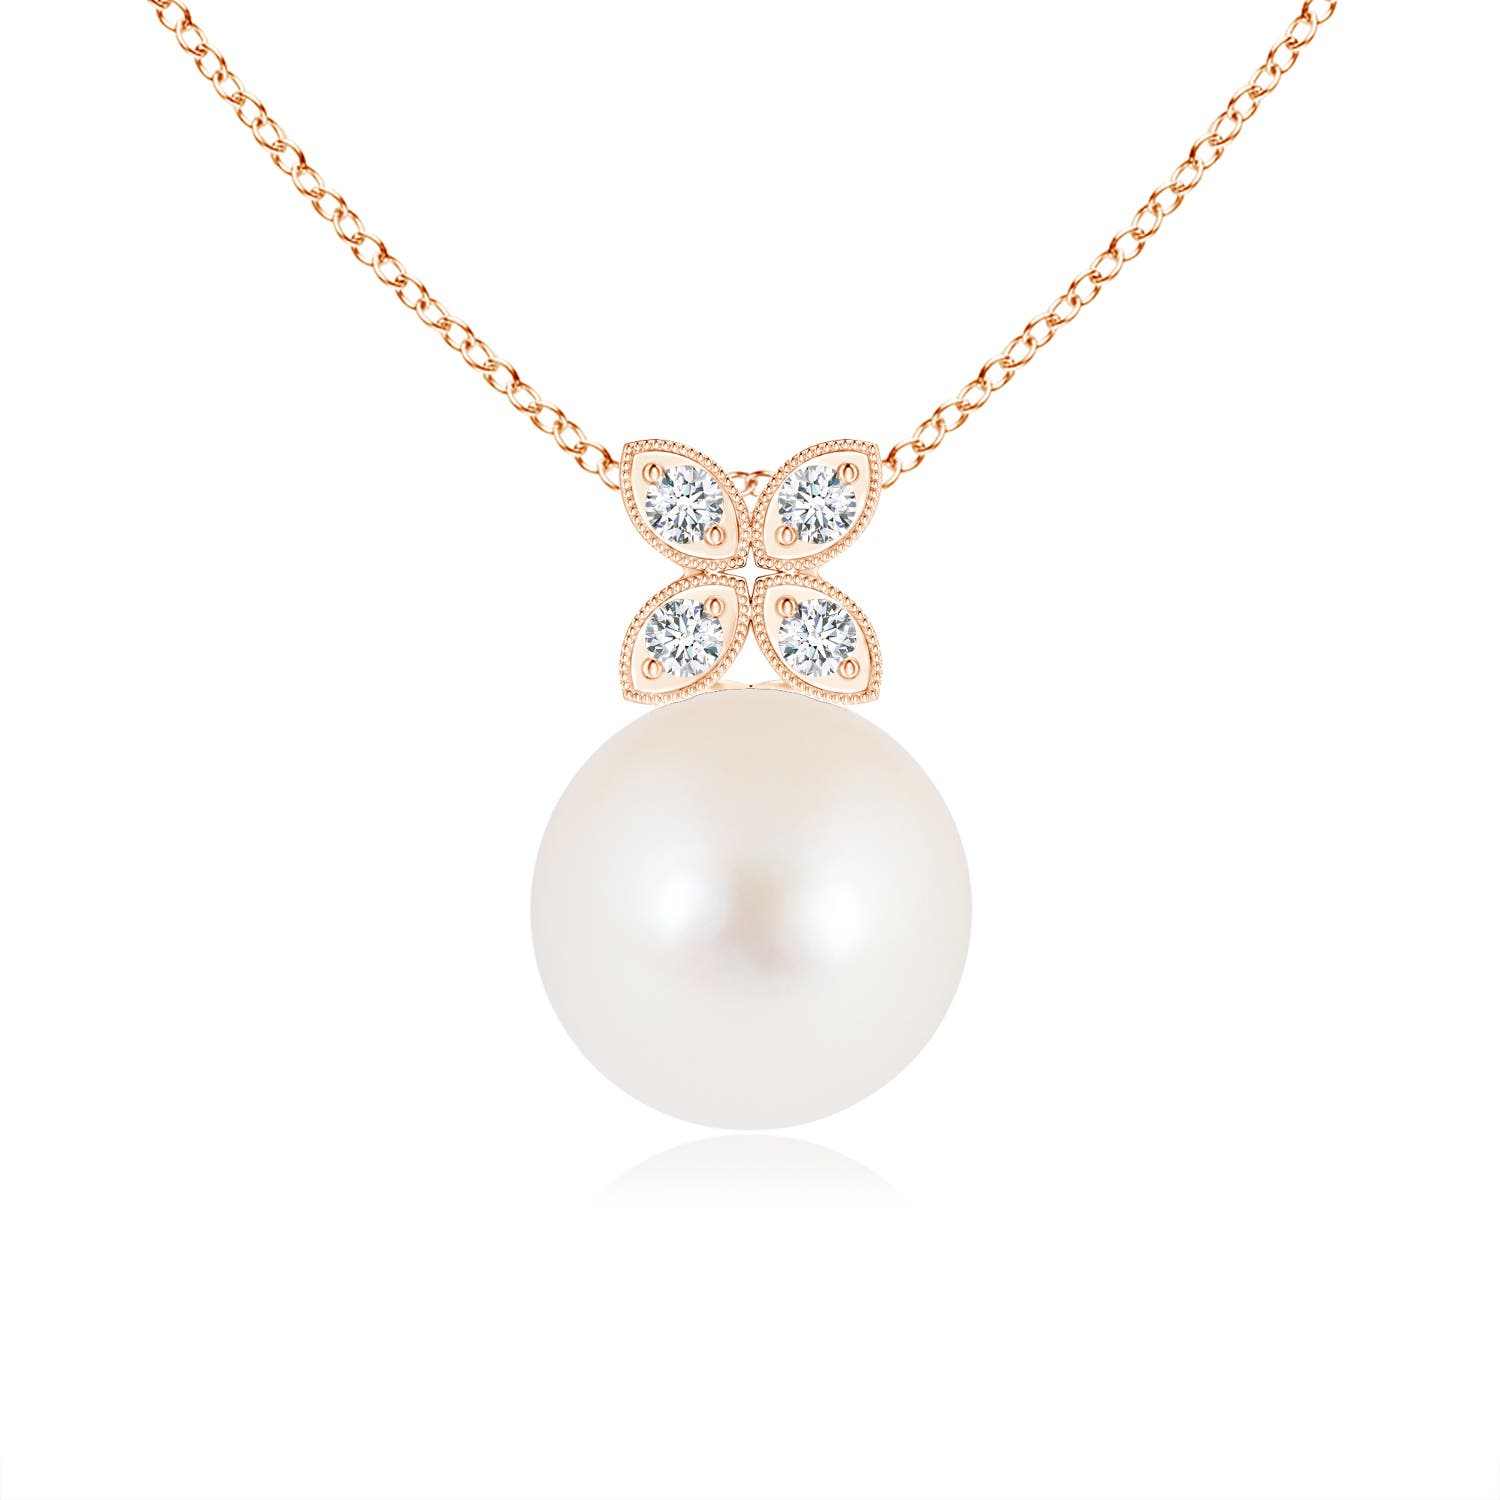 AAA - Freshwater Cultured Pearl / 3.75 CT / 14 KT Rose Gold